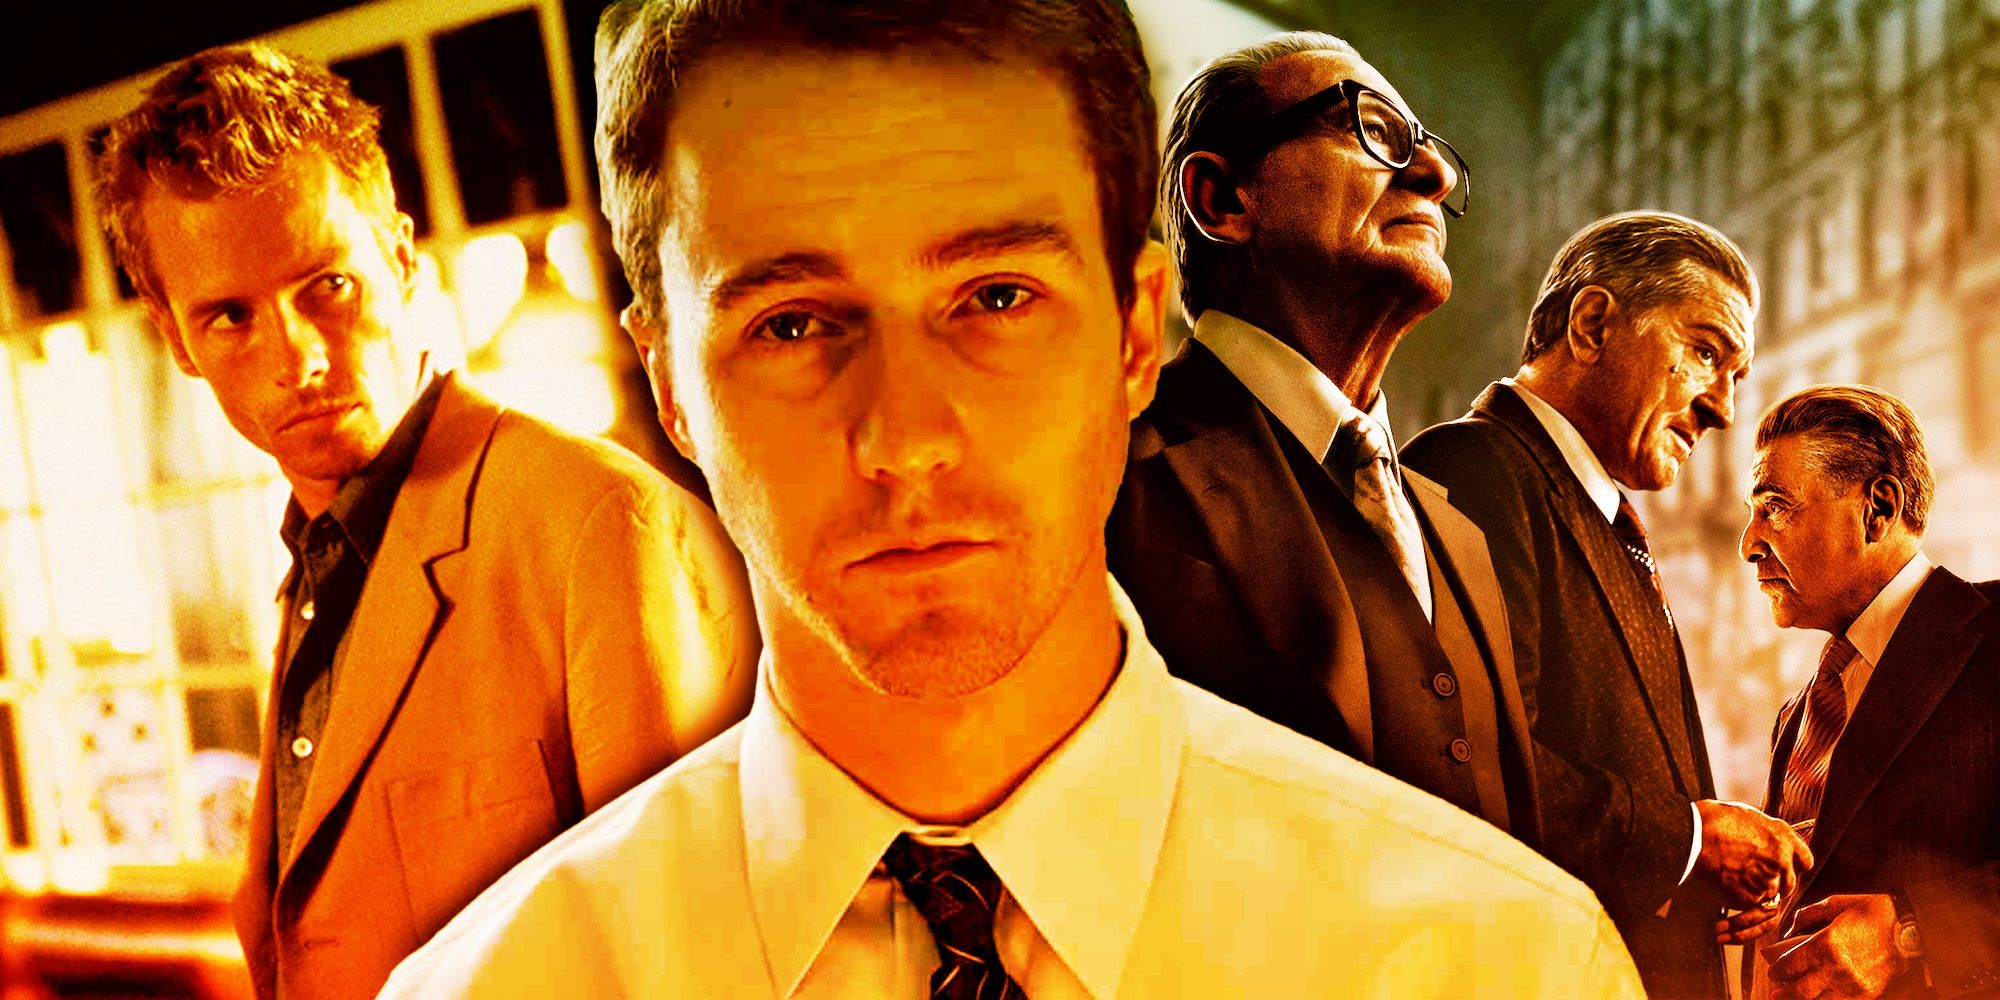 A custom image featuring characters from Fight Club, Memento, and The Irishman